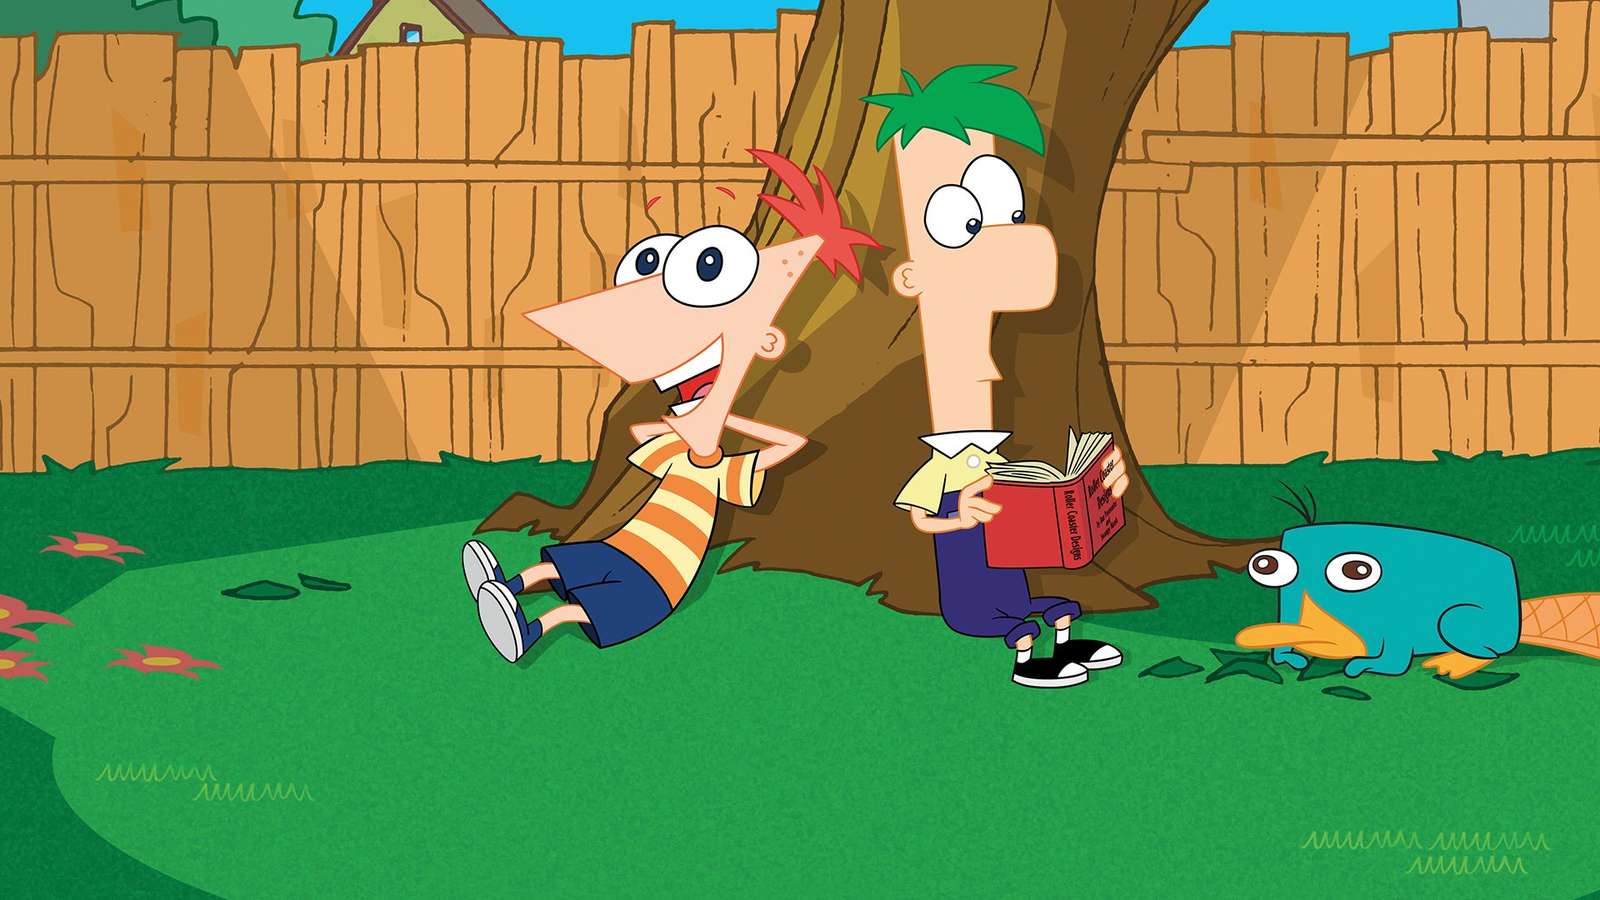 Phineas a Ferb online puzzle